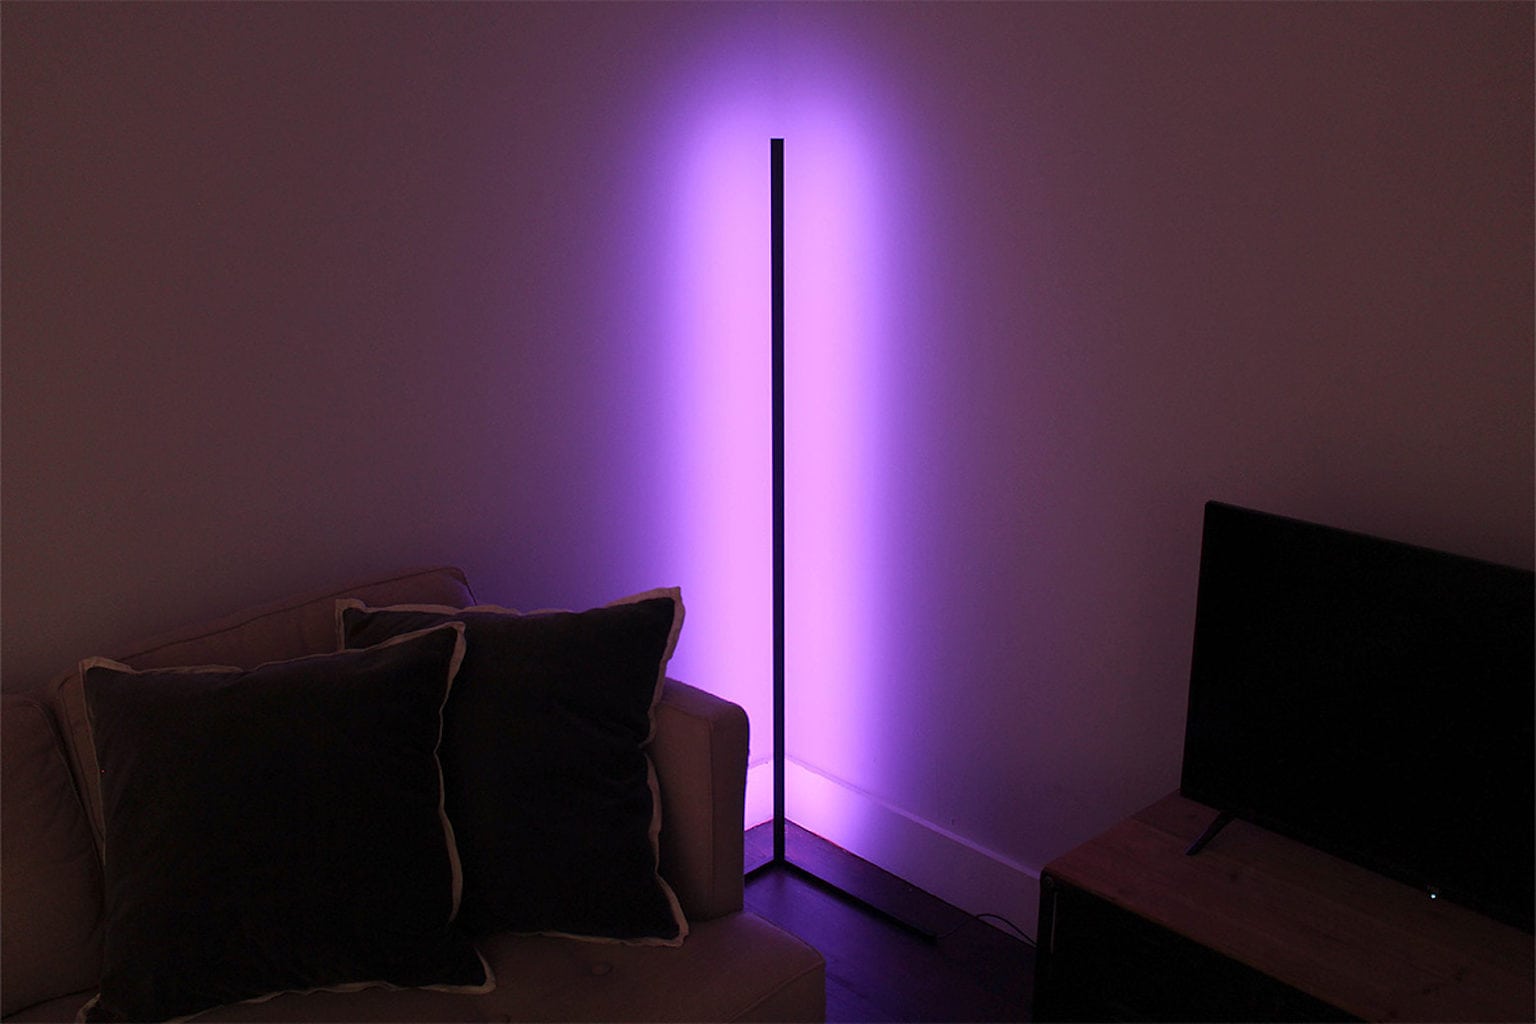 Light up your V-Day date night with this mood-setting LED lamp.